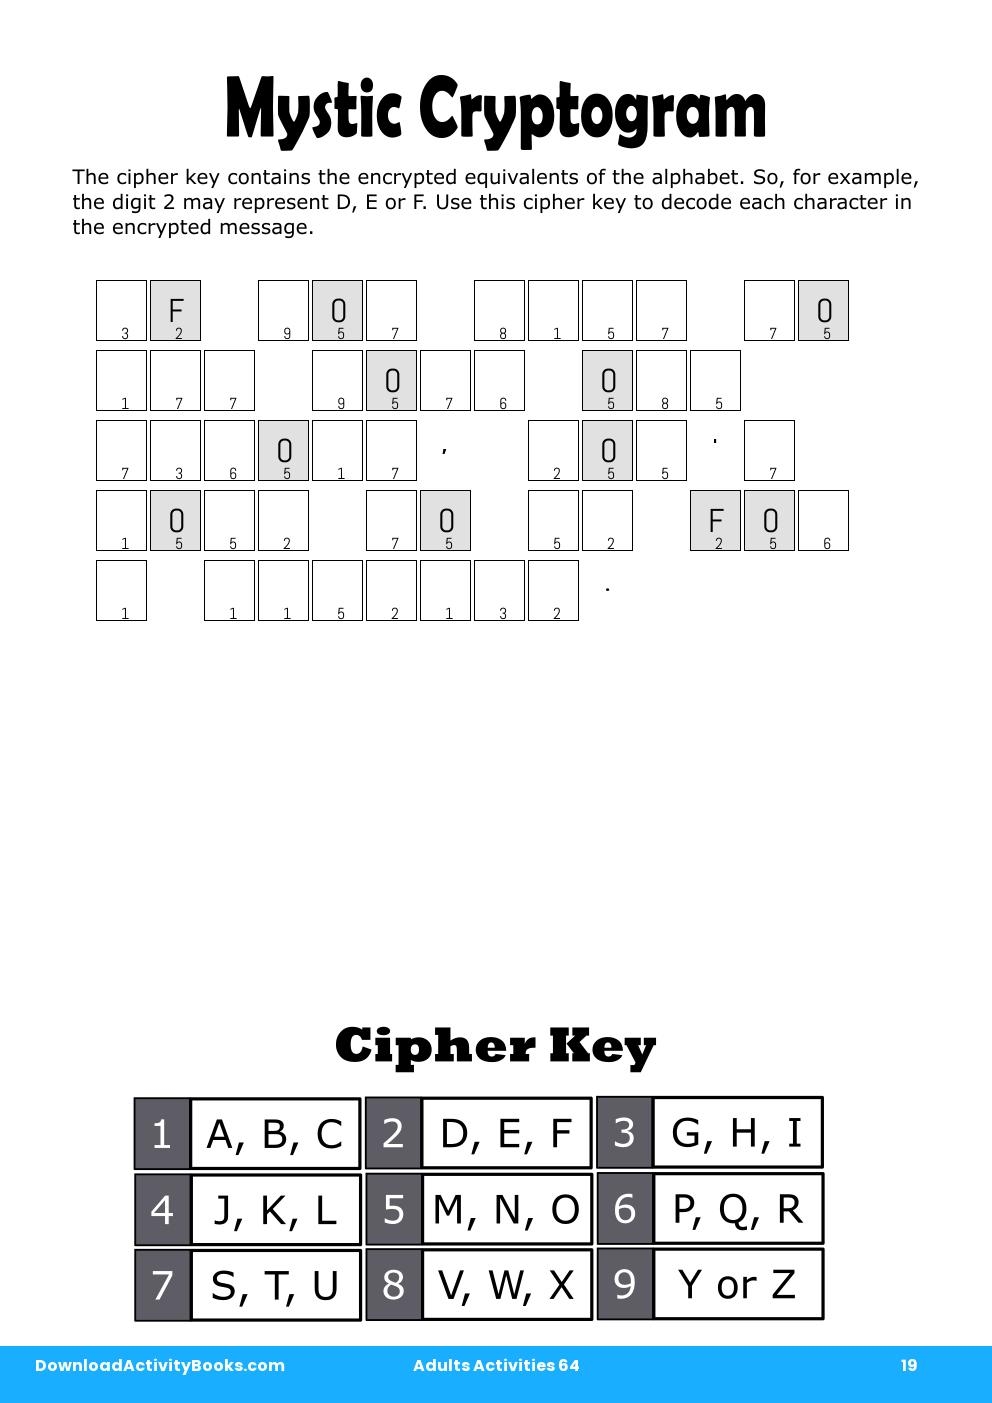 Mystic Cryptogram in Adults Activities 64